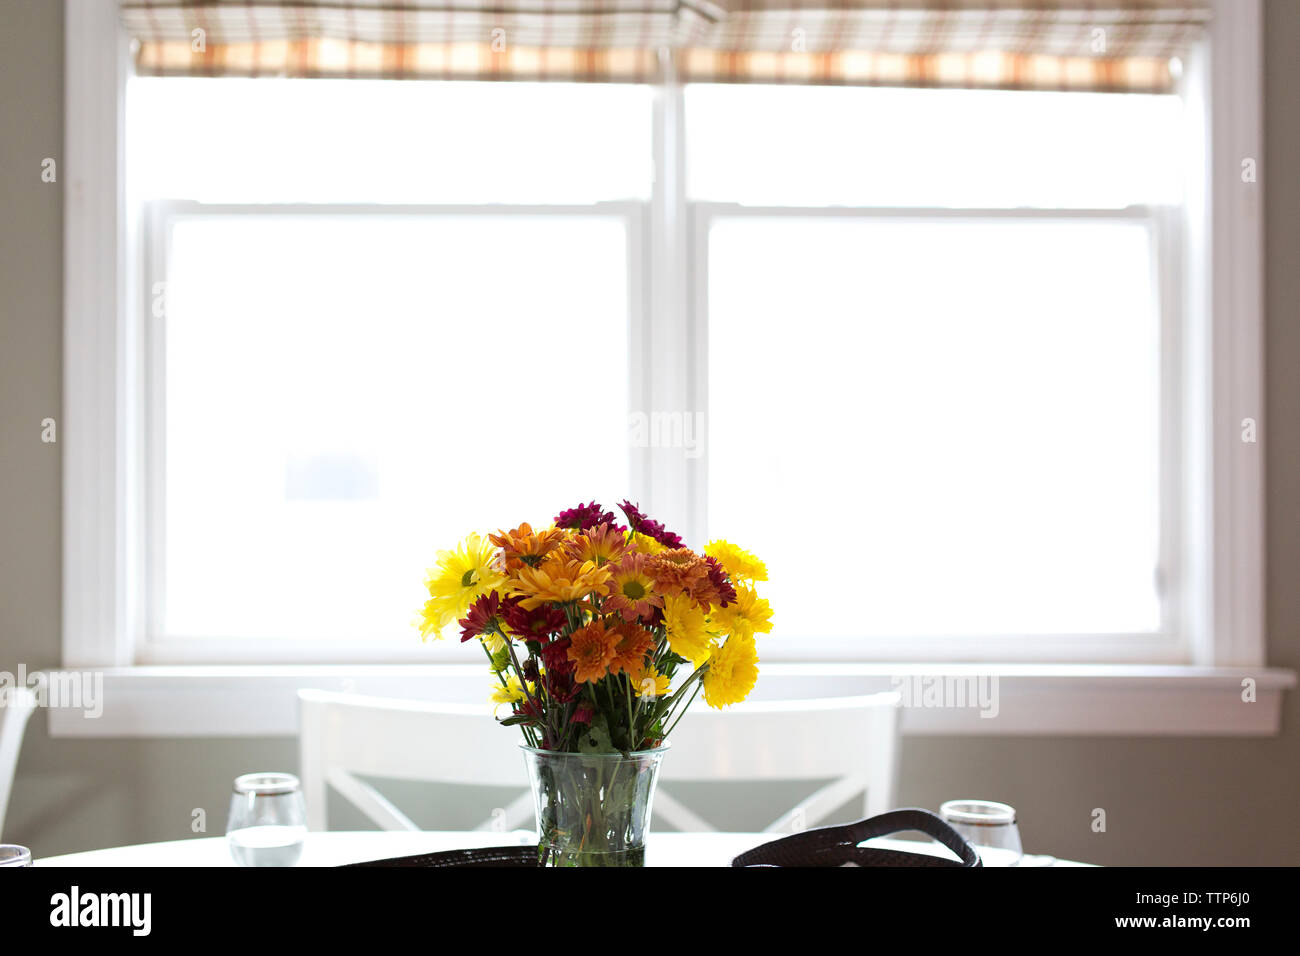 Flowers in vase against window on table at home Stock Photo